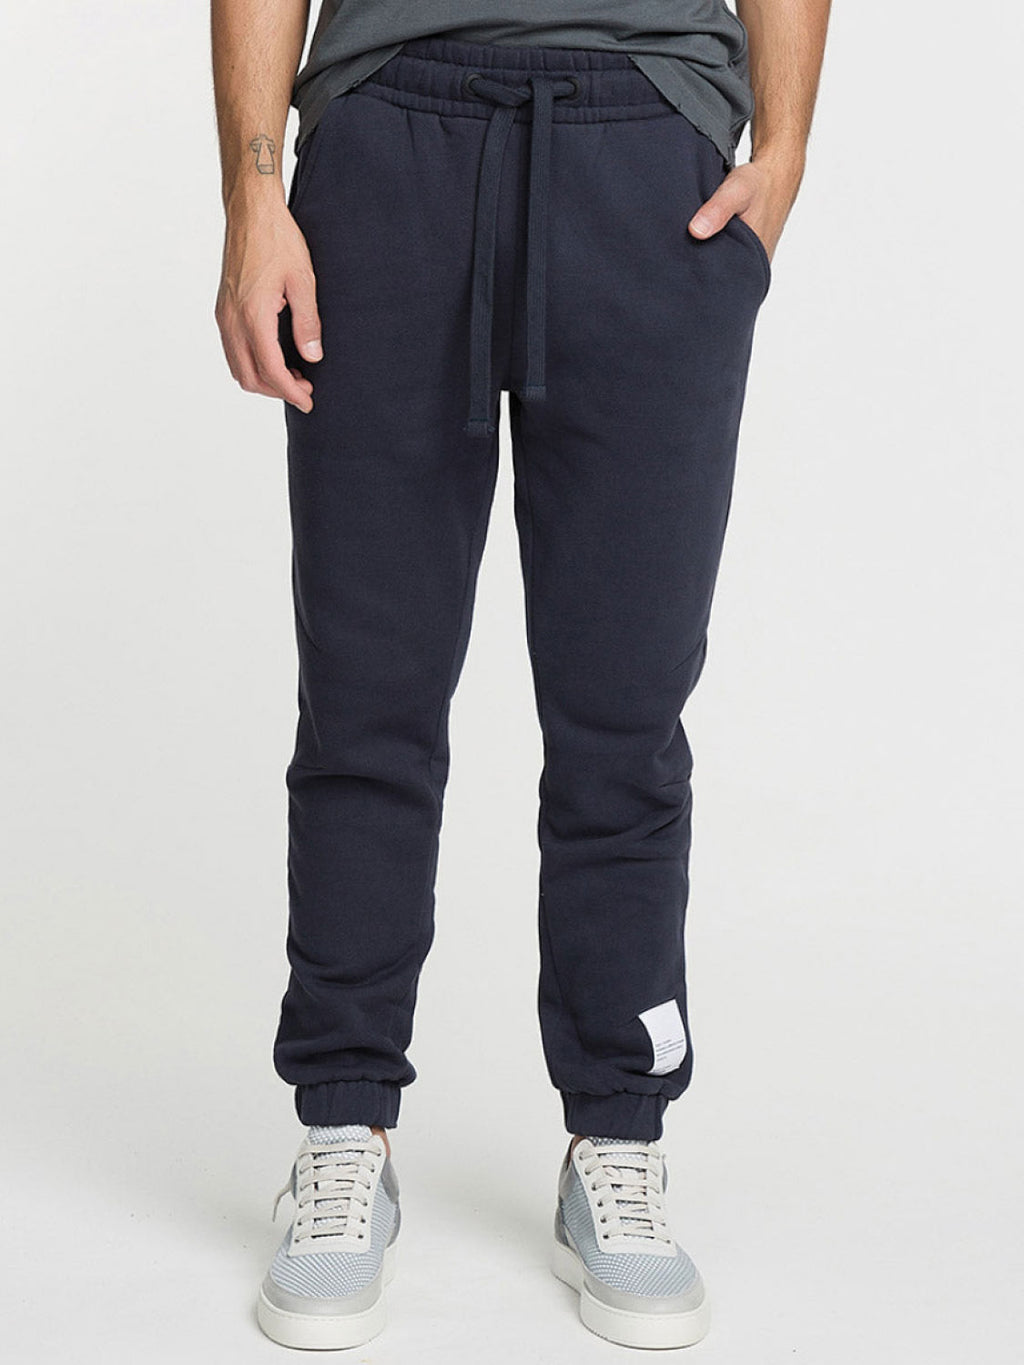 Pants and Sweatpants | Menswear | The Project Garments